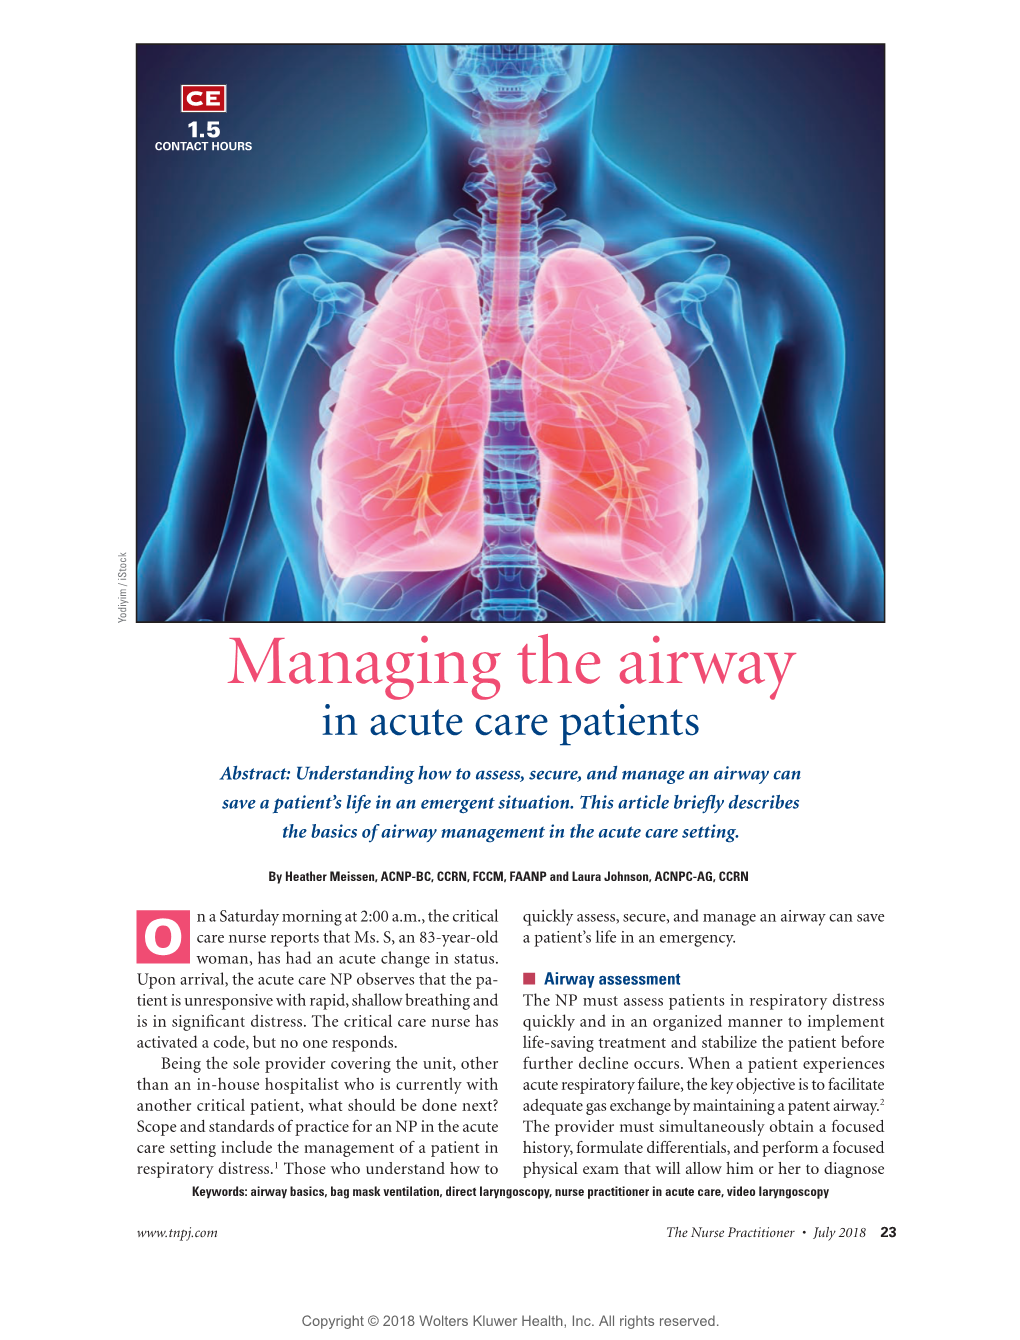 Managing the Airway in Acute Care Patients Abstract: Understanding How to Assess, Secure, and Manage an Airway Can Save a Patient’S Life in an Emergent Situation